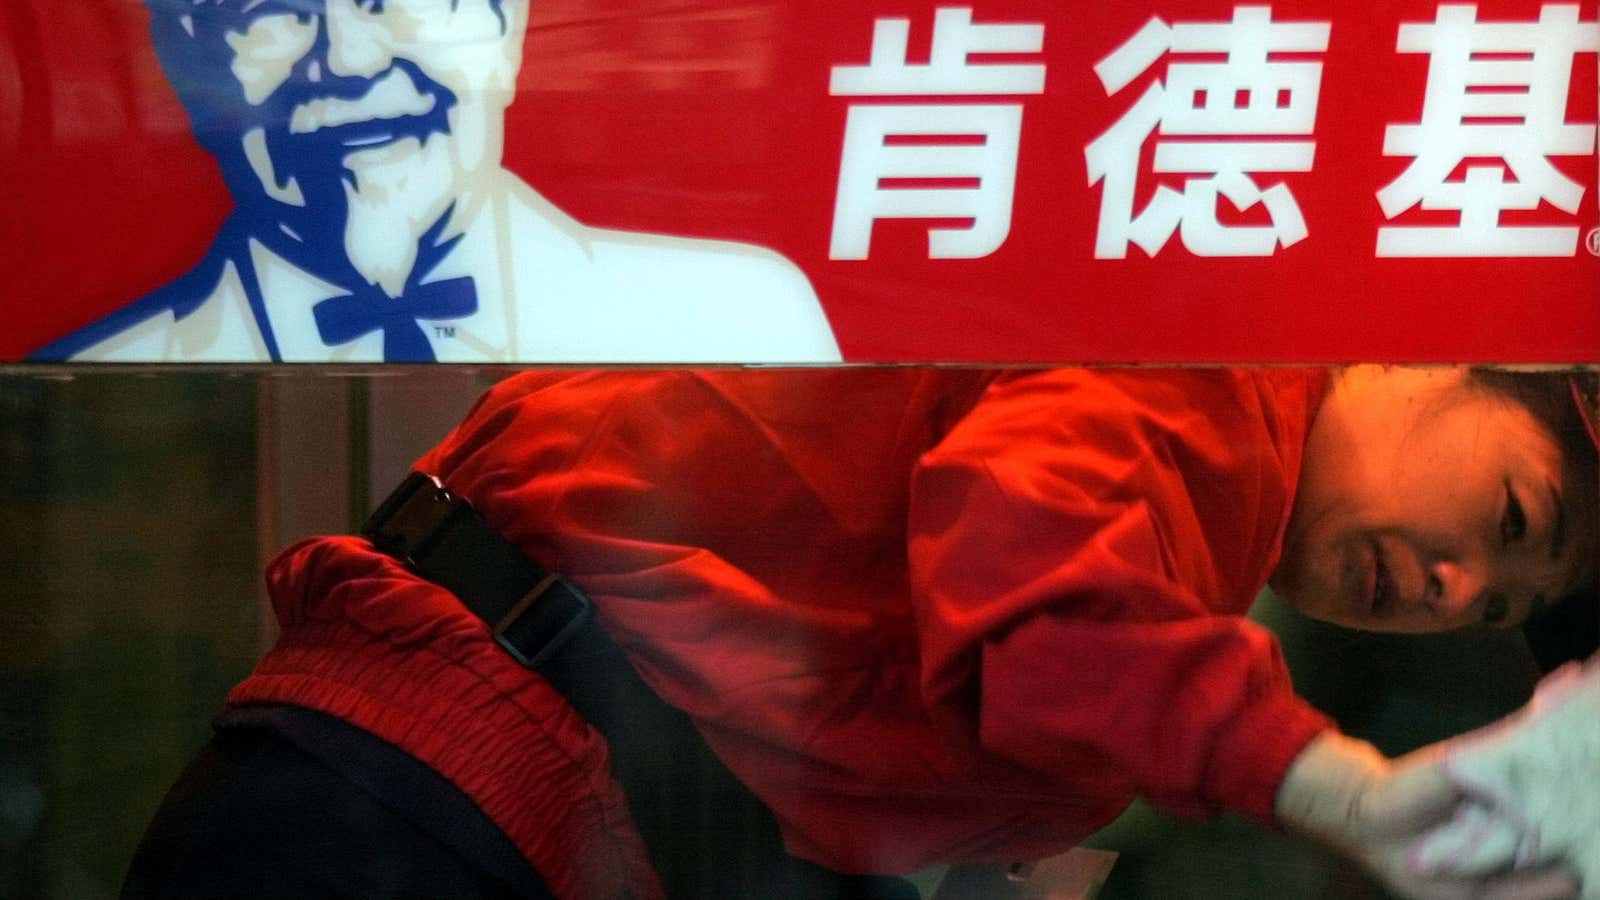 KFC’s reputation problems will be hard to wipe clean